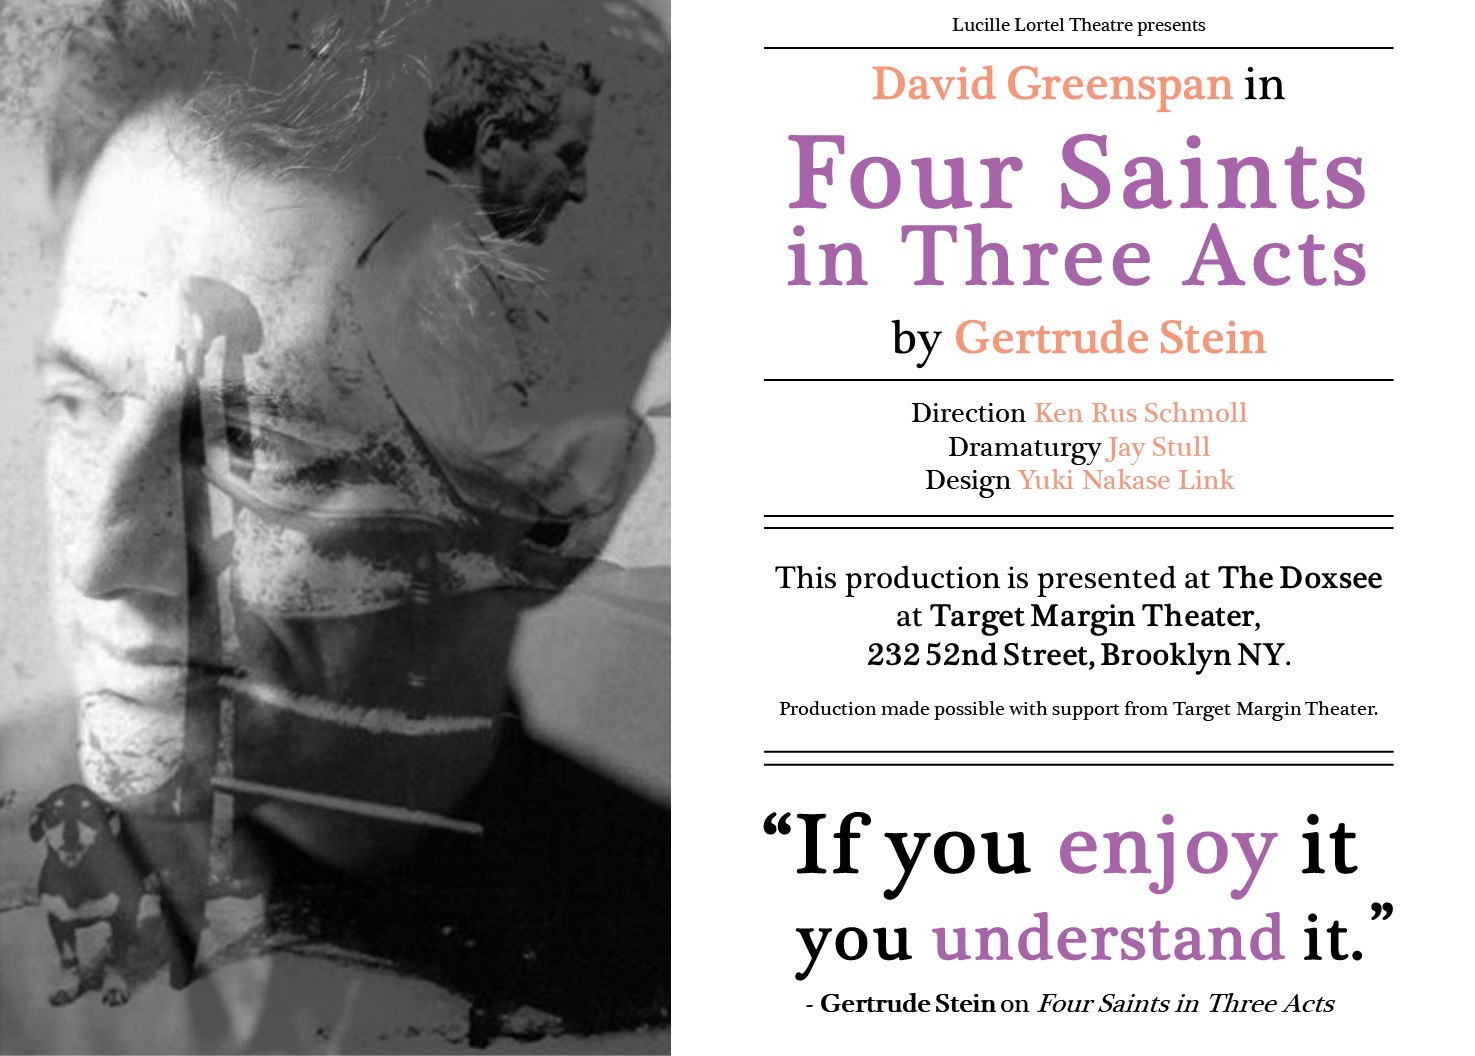 Poster image for play: Four Saints in Three Acts. A photo of David Greenspan is superimposed over a black and white photo of Gertrude Stein on the left. The poster reads: 